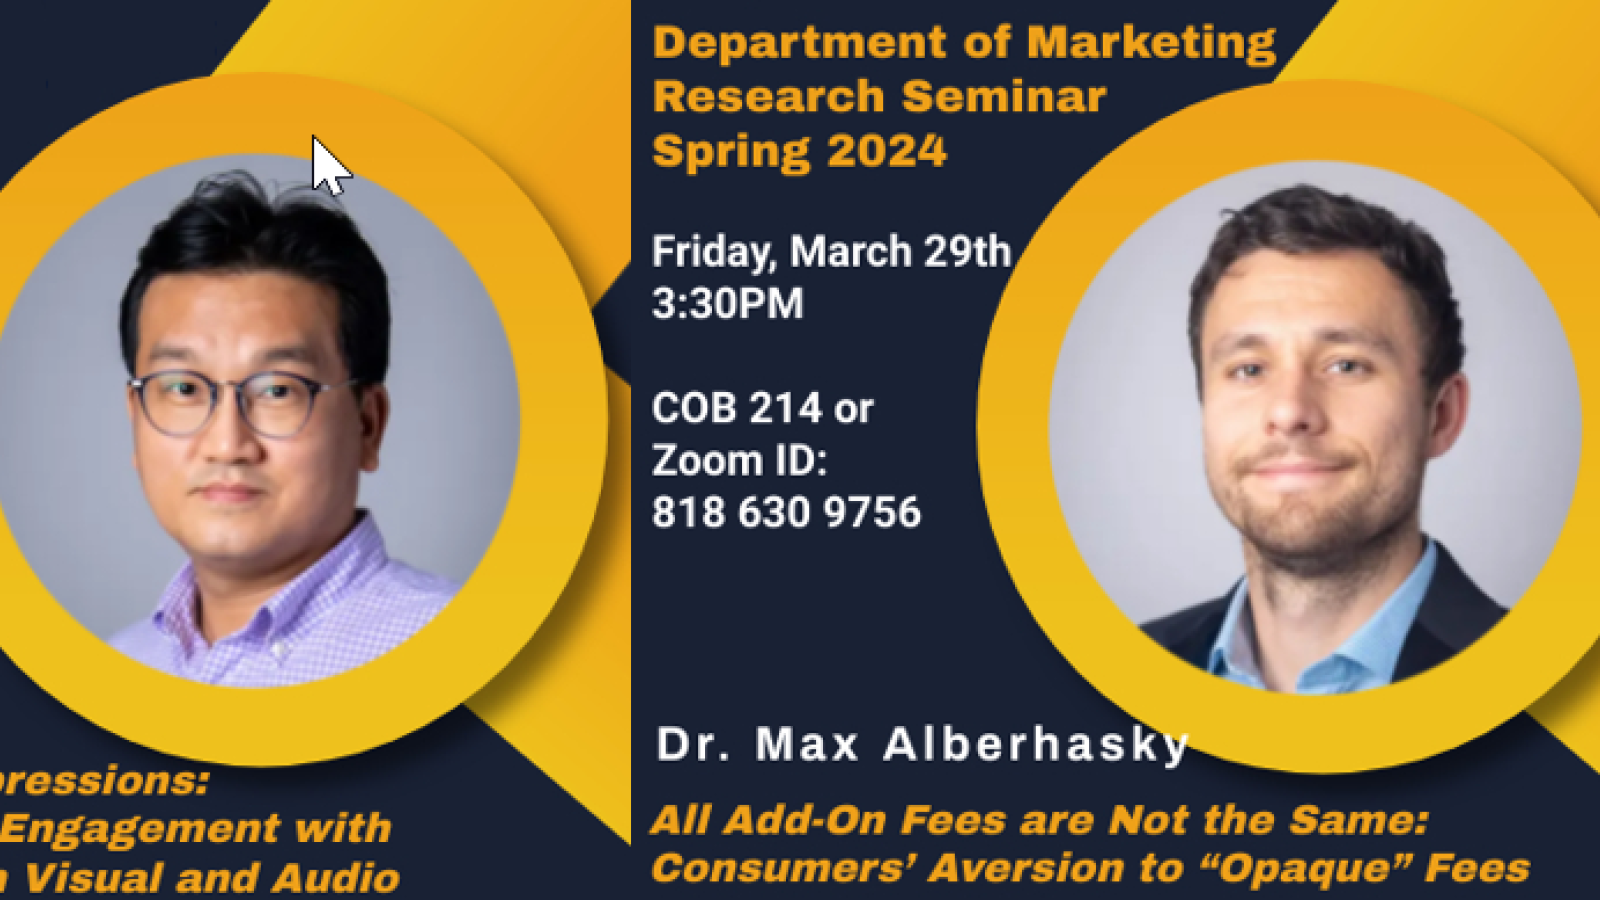 Dept. of Marketing Research Seminar Friday March 29 3:30 COB 214 zoom 8186309756 Adein Lee and Max Alberhasky 